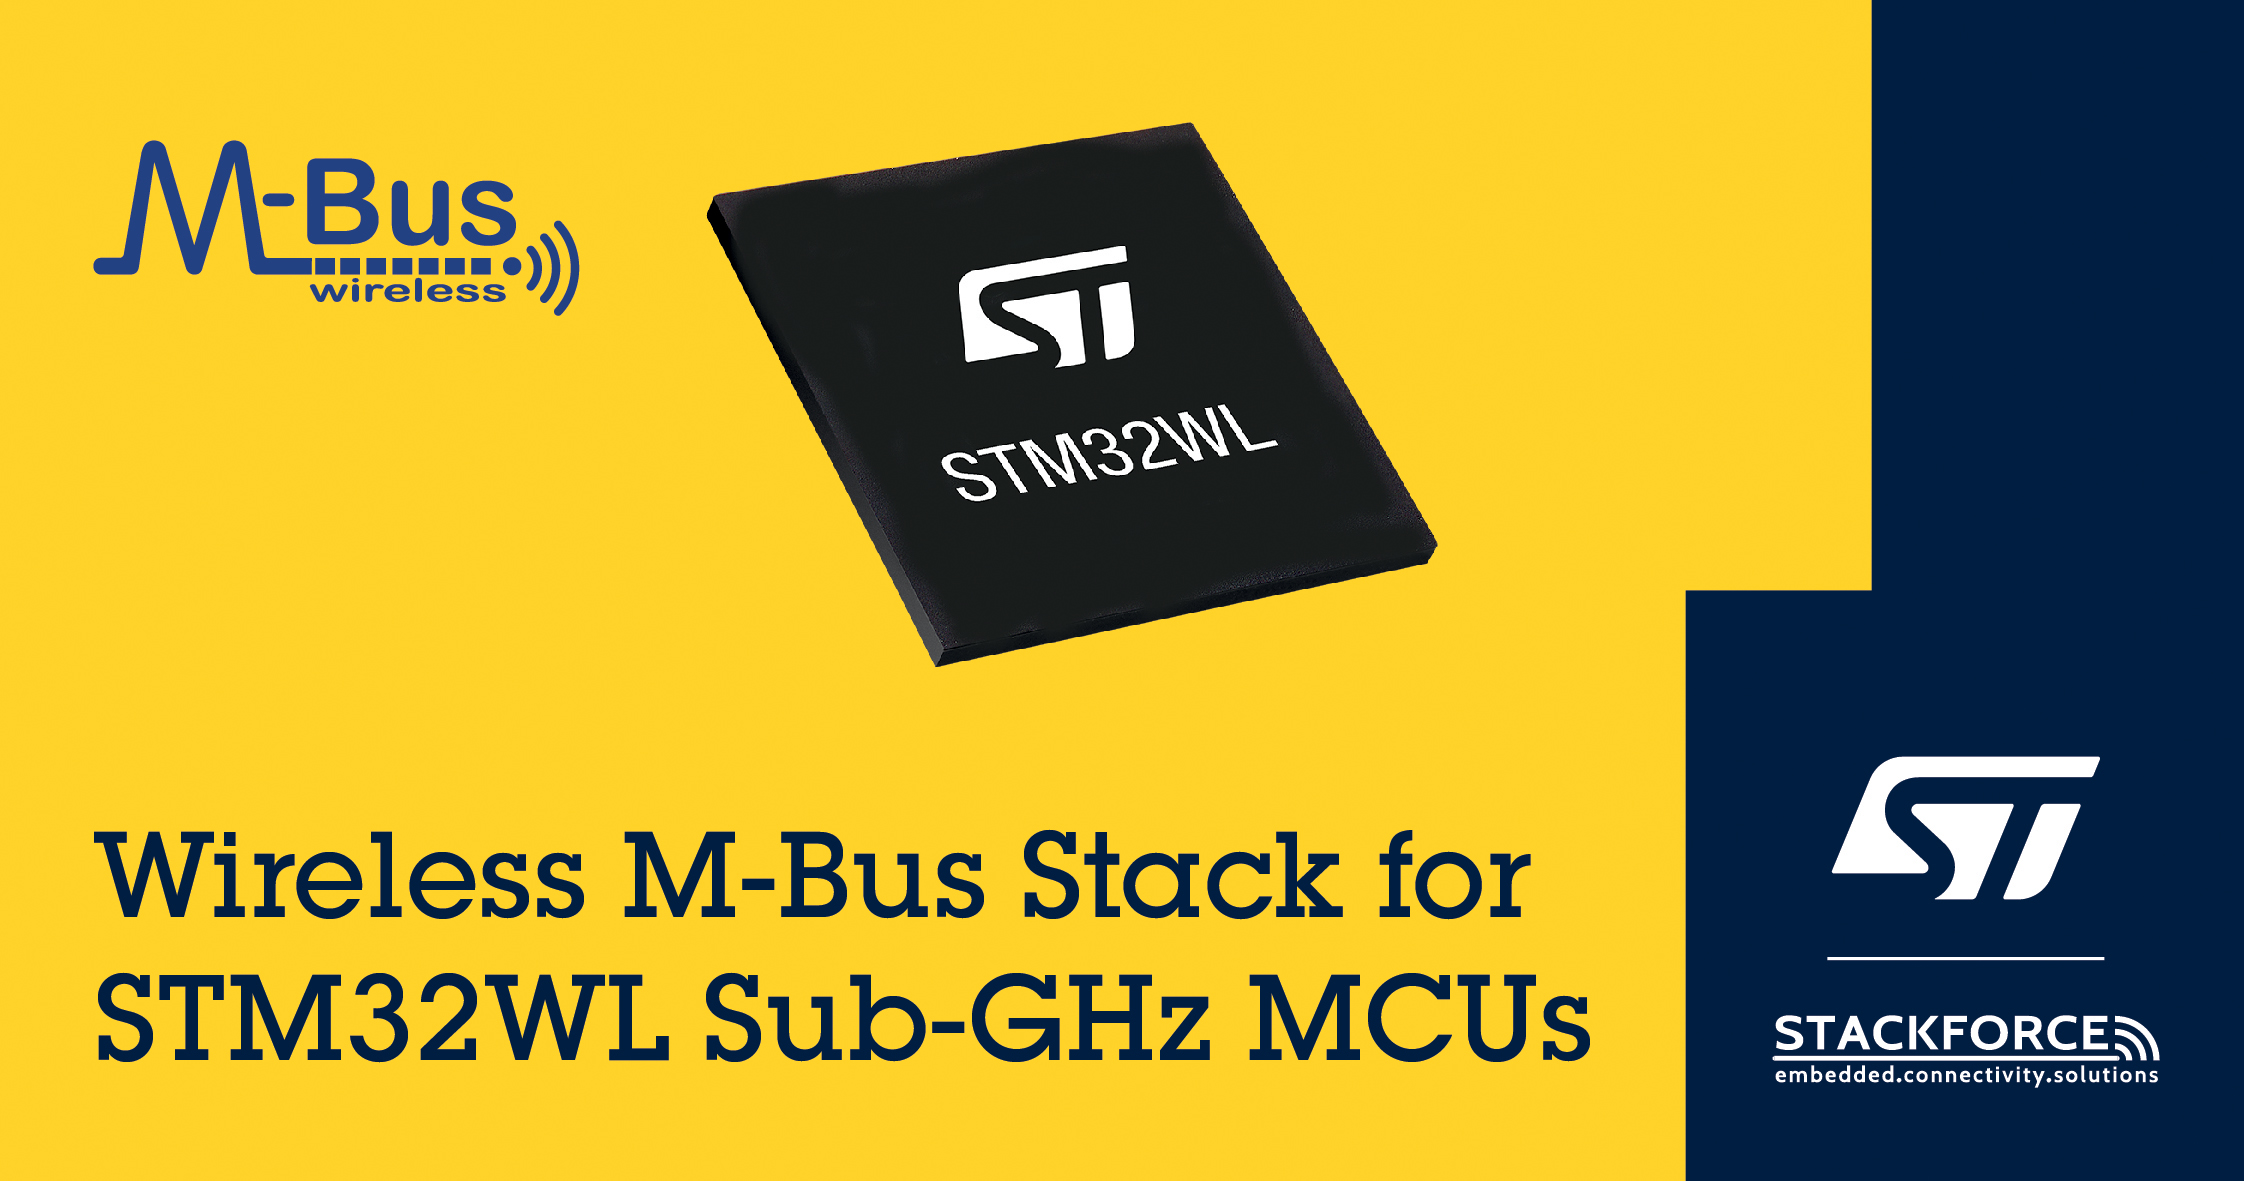 STMicroelectronics Expands STM32WL Wireless Microcontroller Ecosystem with wM-Bus Stack for Smart Metering from Stackforce